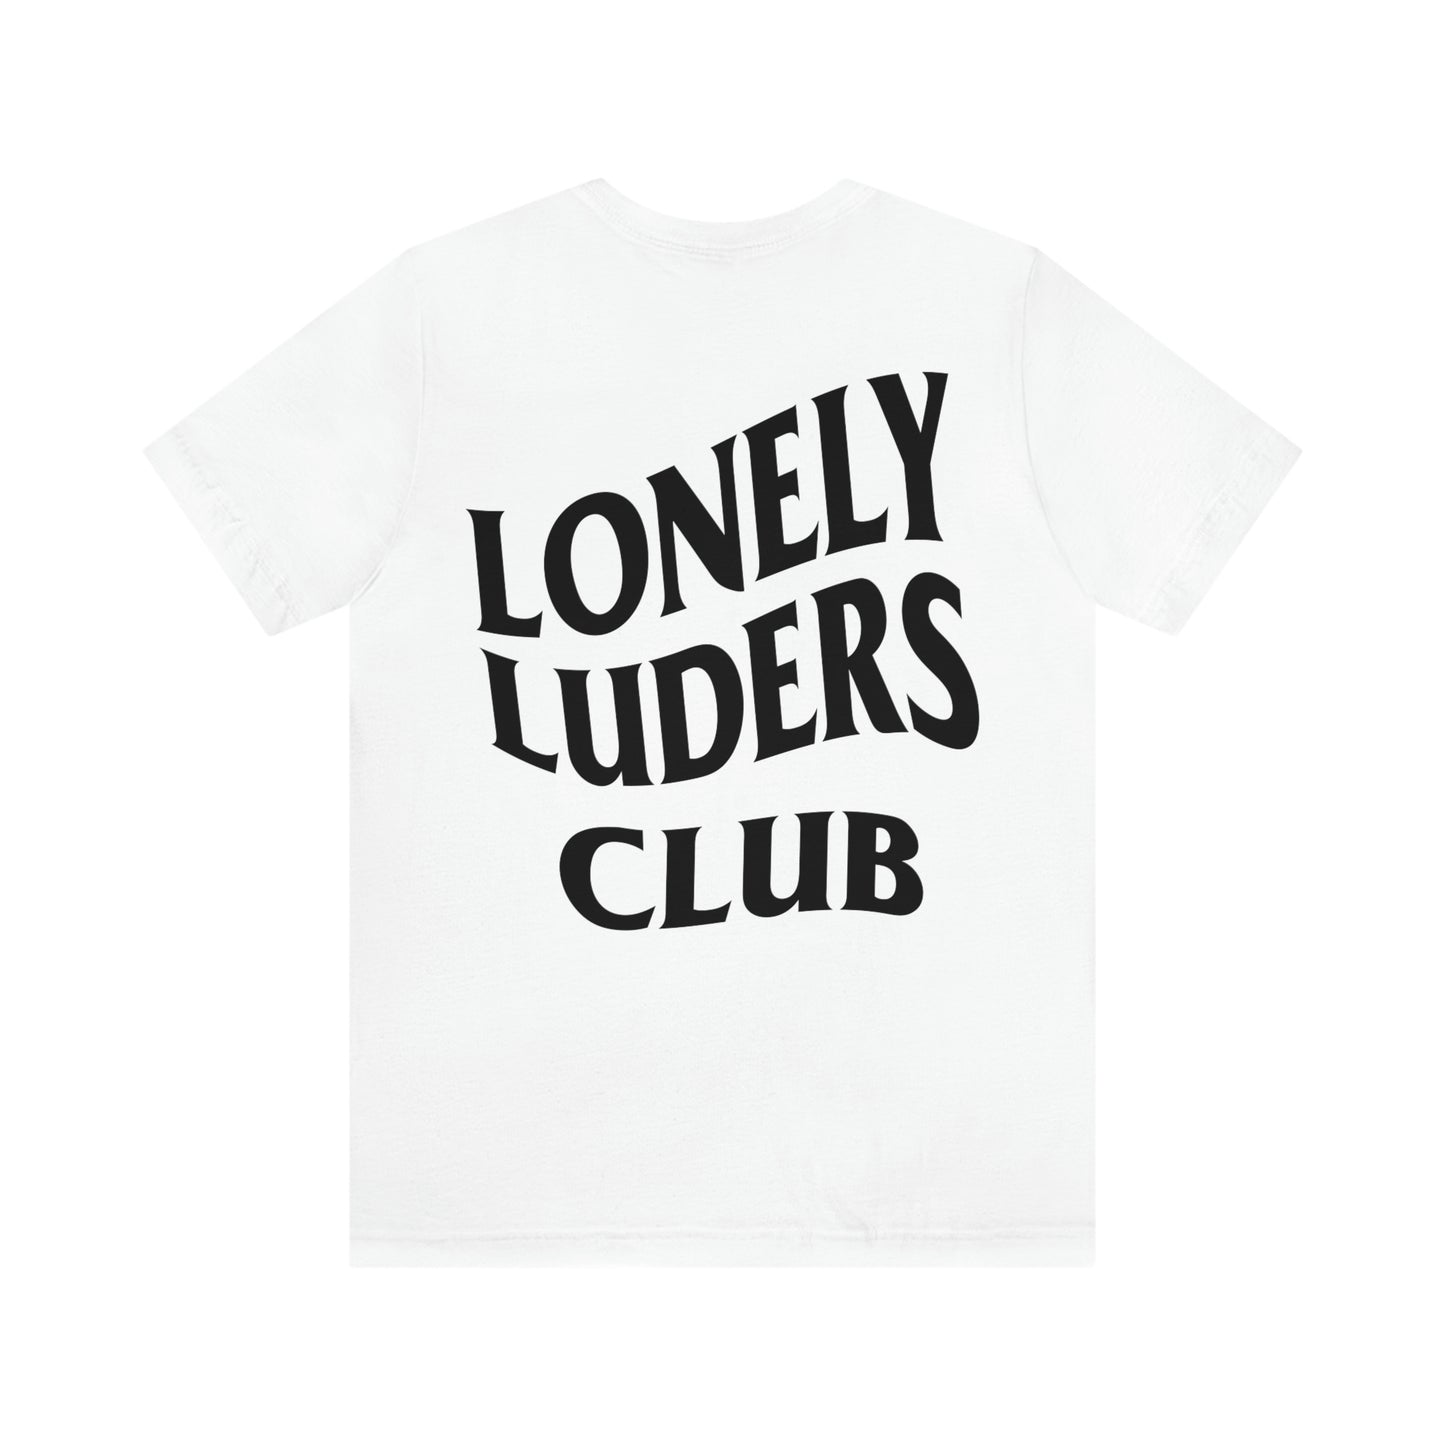 Lonely Luders Club Shirt